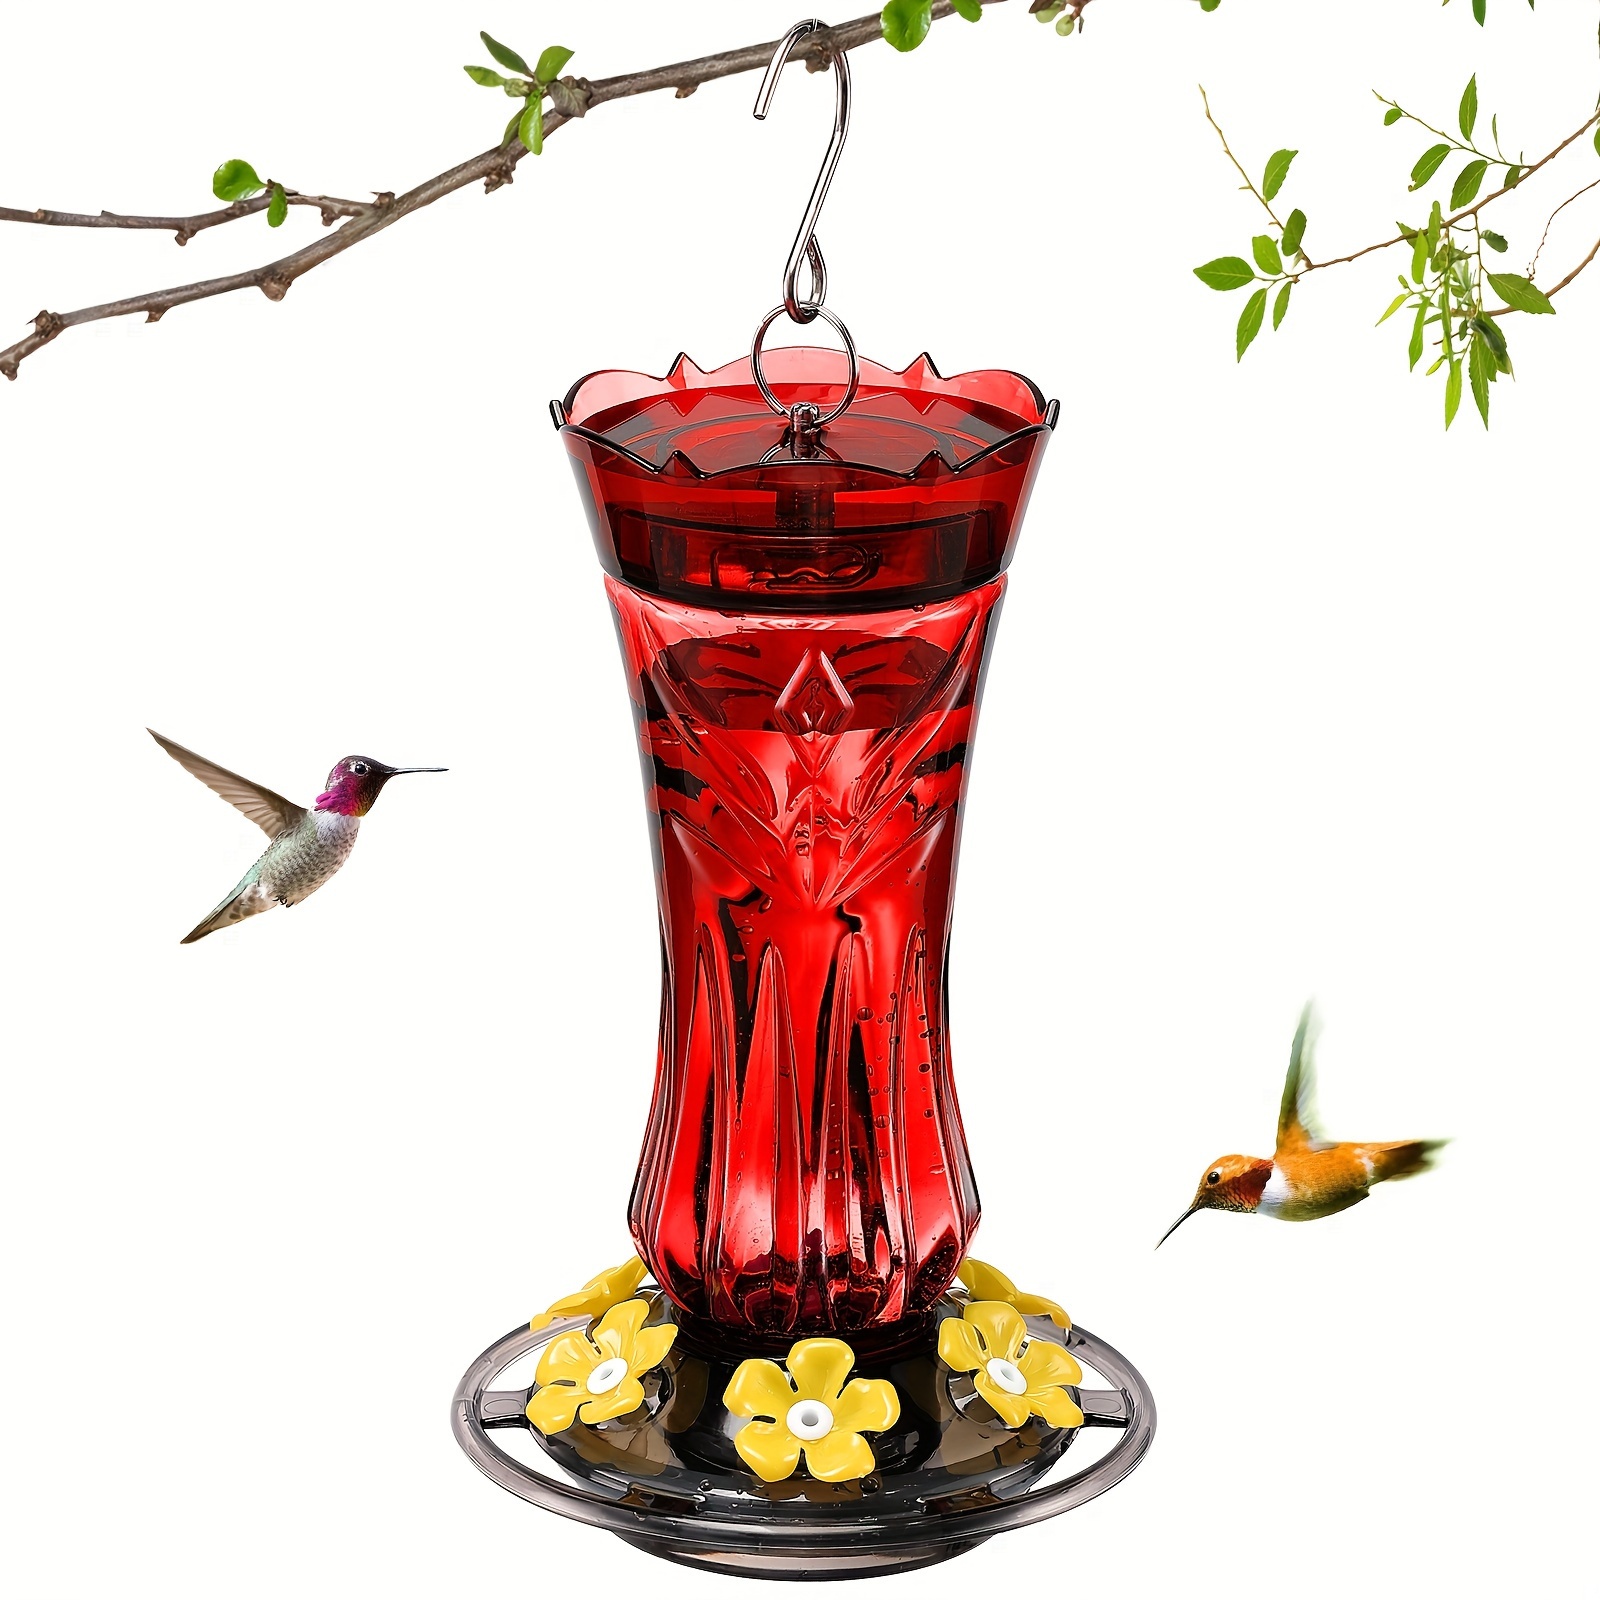 

1pc Red Plastic Hummingbird Feeder, Durable Plastic Material, Easy To Hang Outdoor Garden Decor With Ant Moat And Yellow Flower Accents